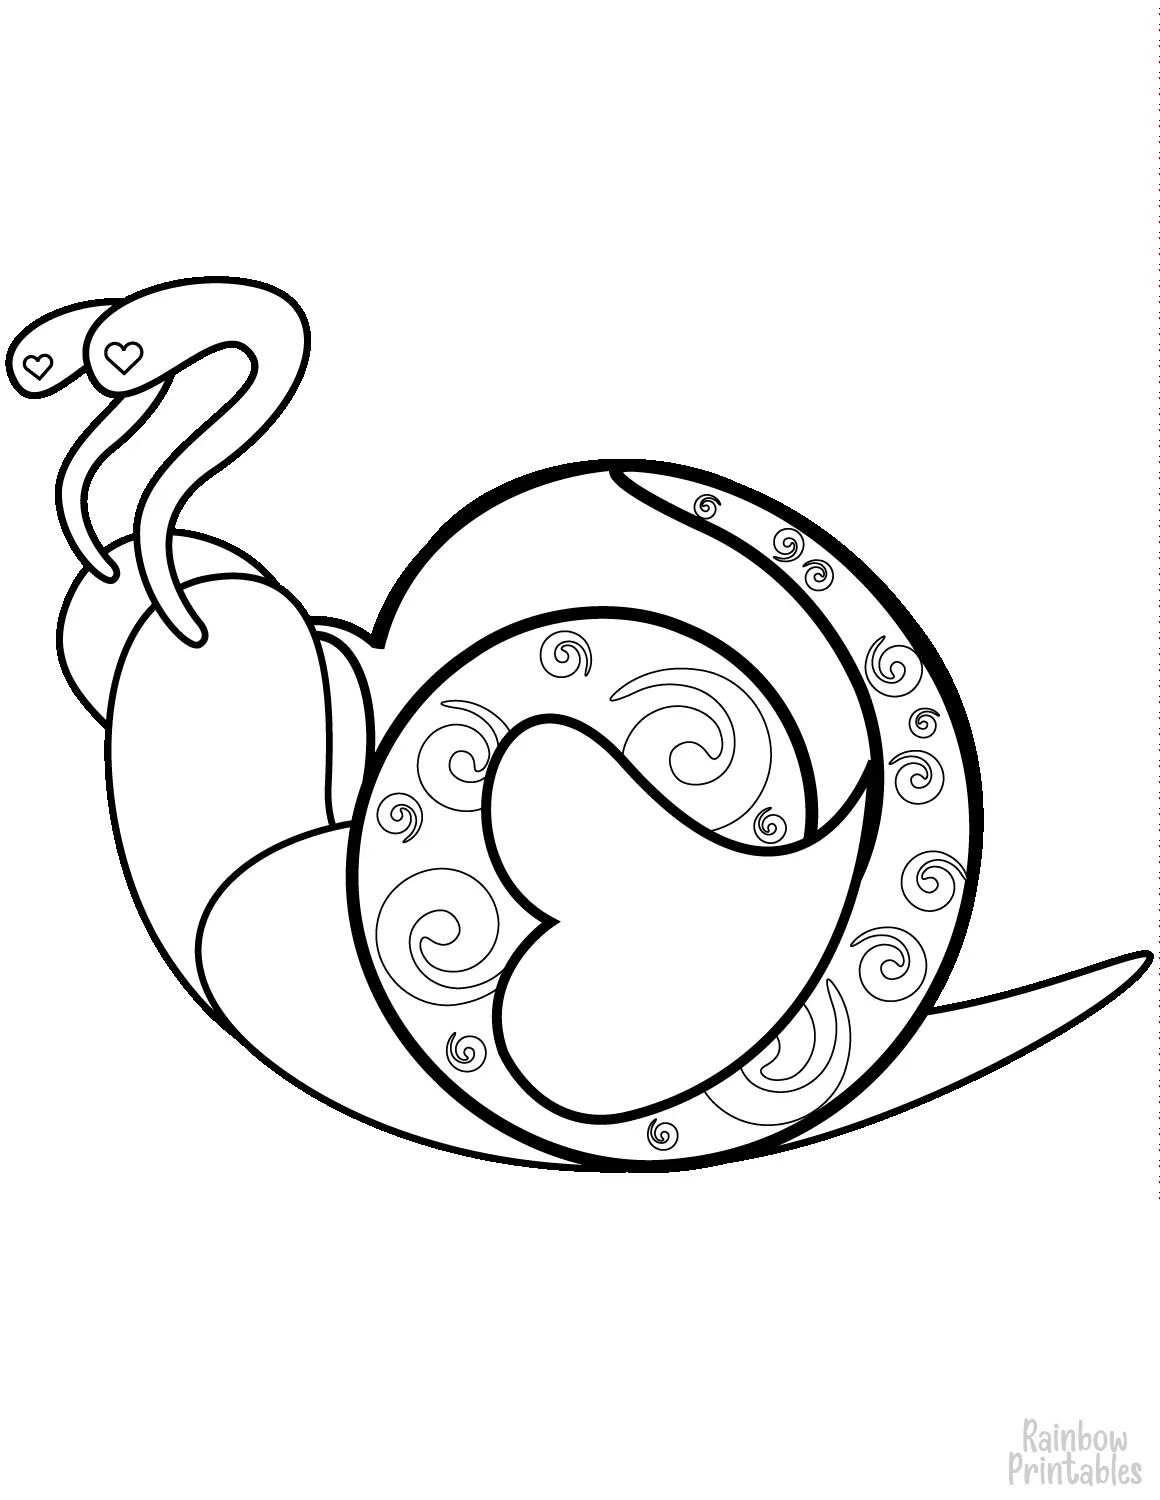 SIMPLE-EASY-line-drawings-MANDALA-SNAIL-coloring-page-for-kids